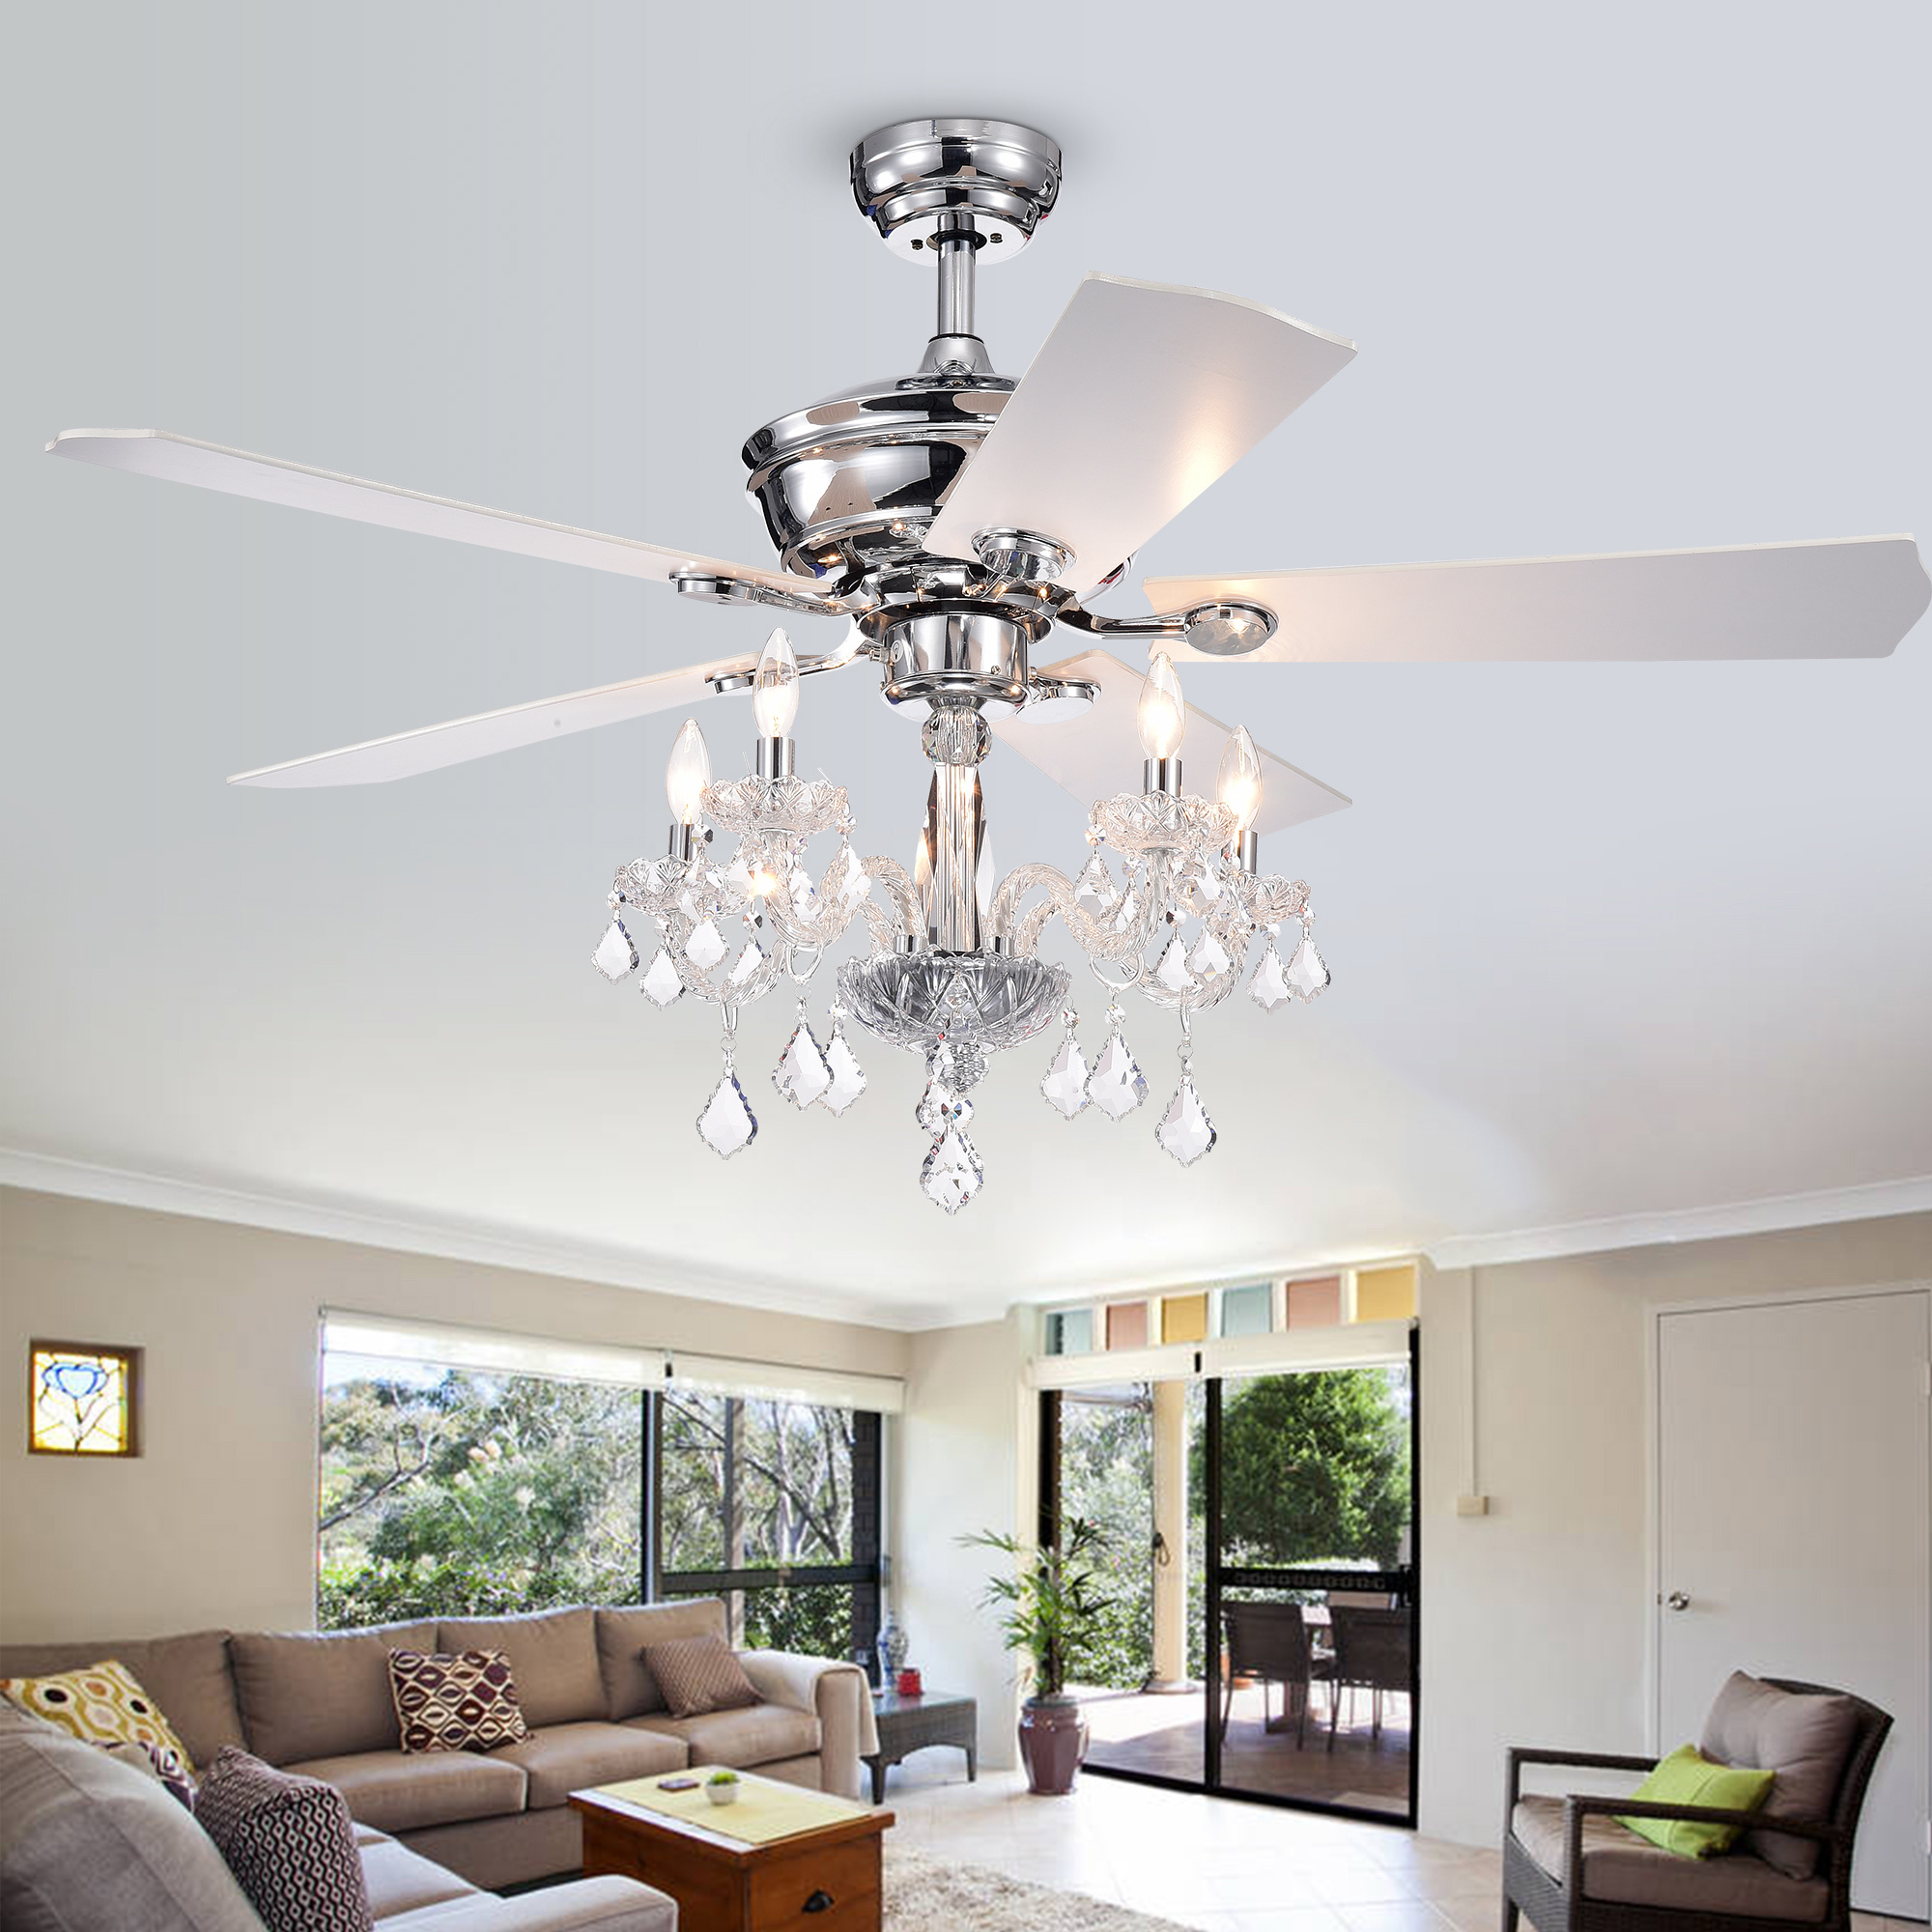 Havorand III 52-inch 5-light Chrome Lighted Ceiling Fans w/Crystal Branched Chandelier(Remote Controlled&2 Color Option Blades)